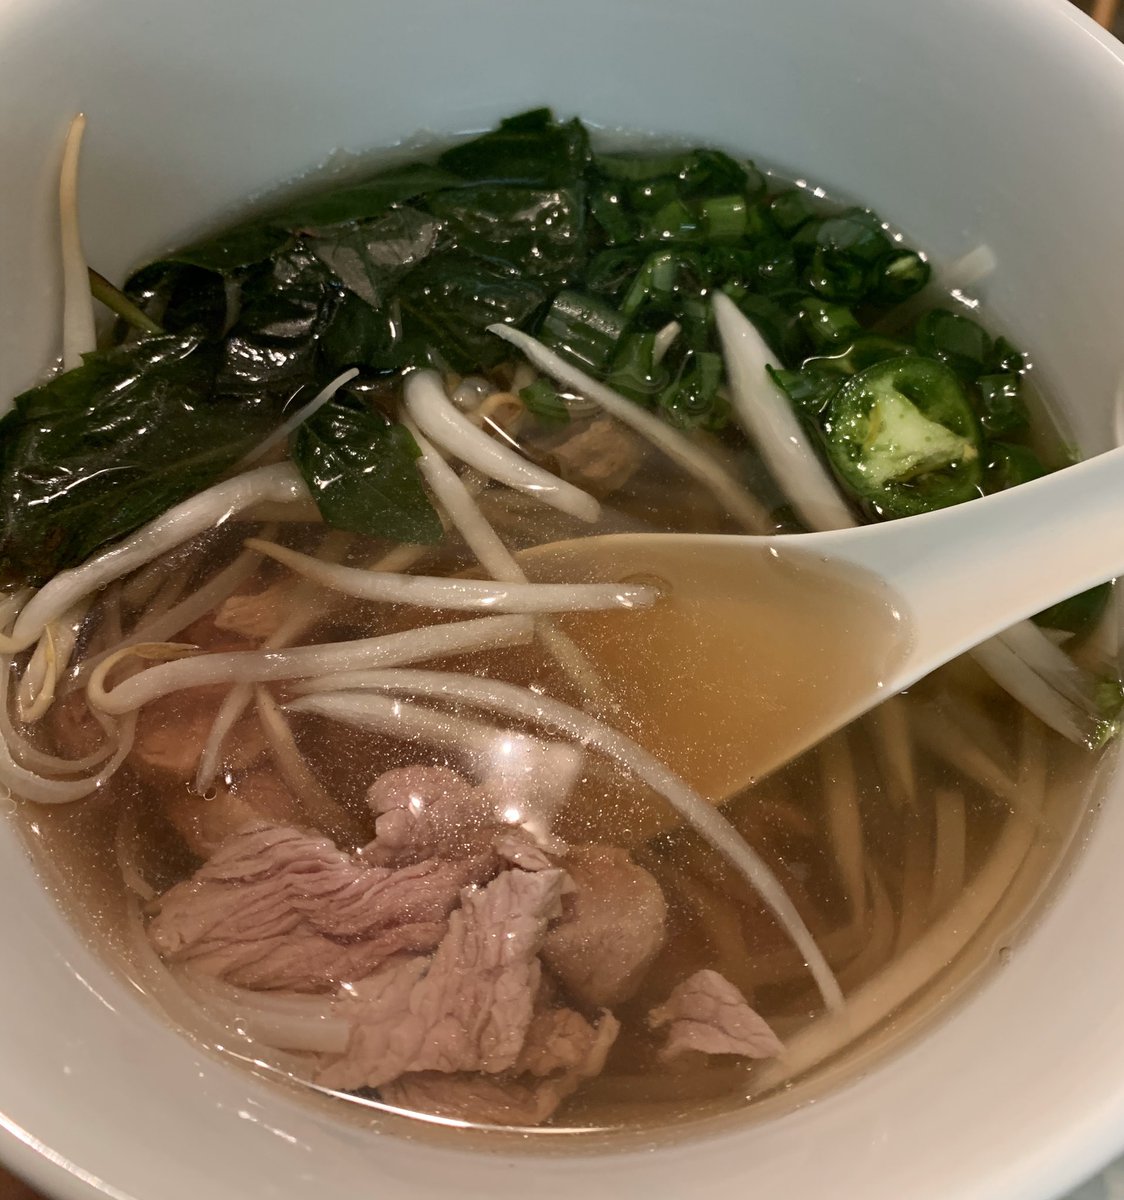 Phở Bo. Recipe from the sister institution of my former employer